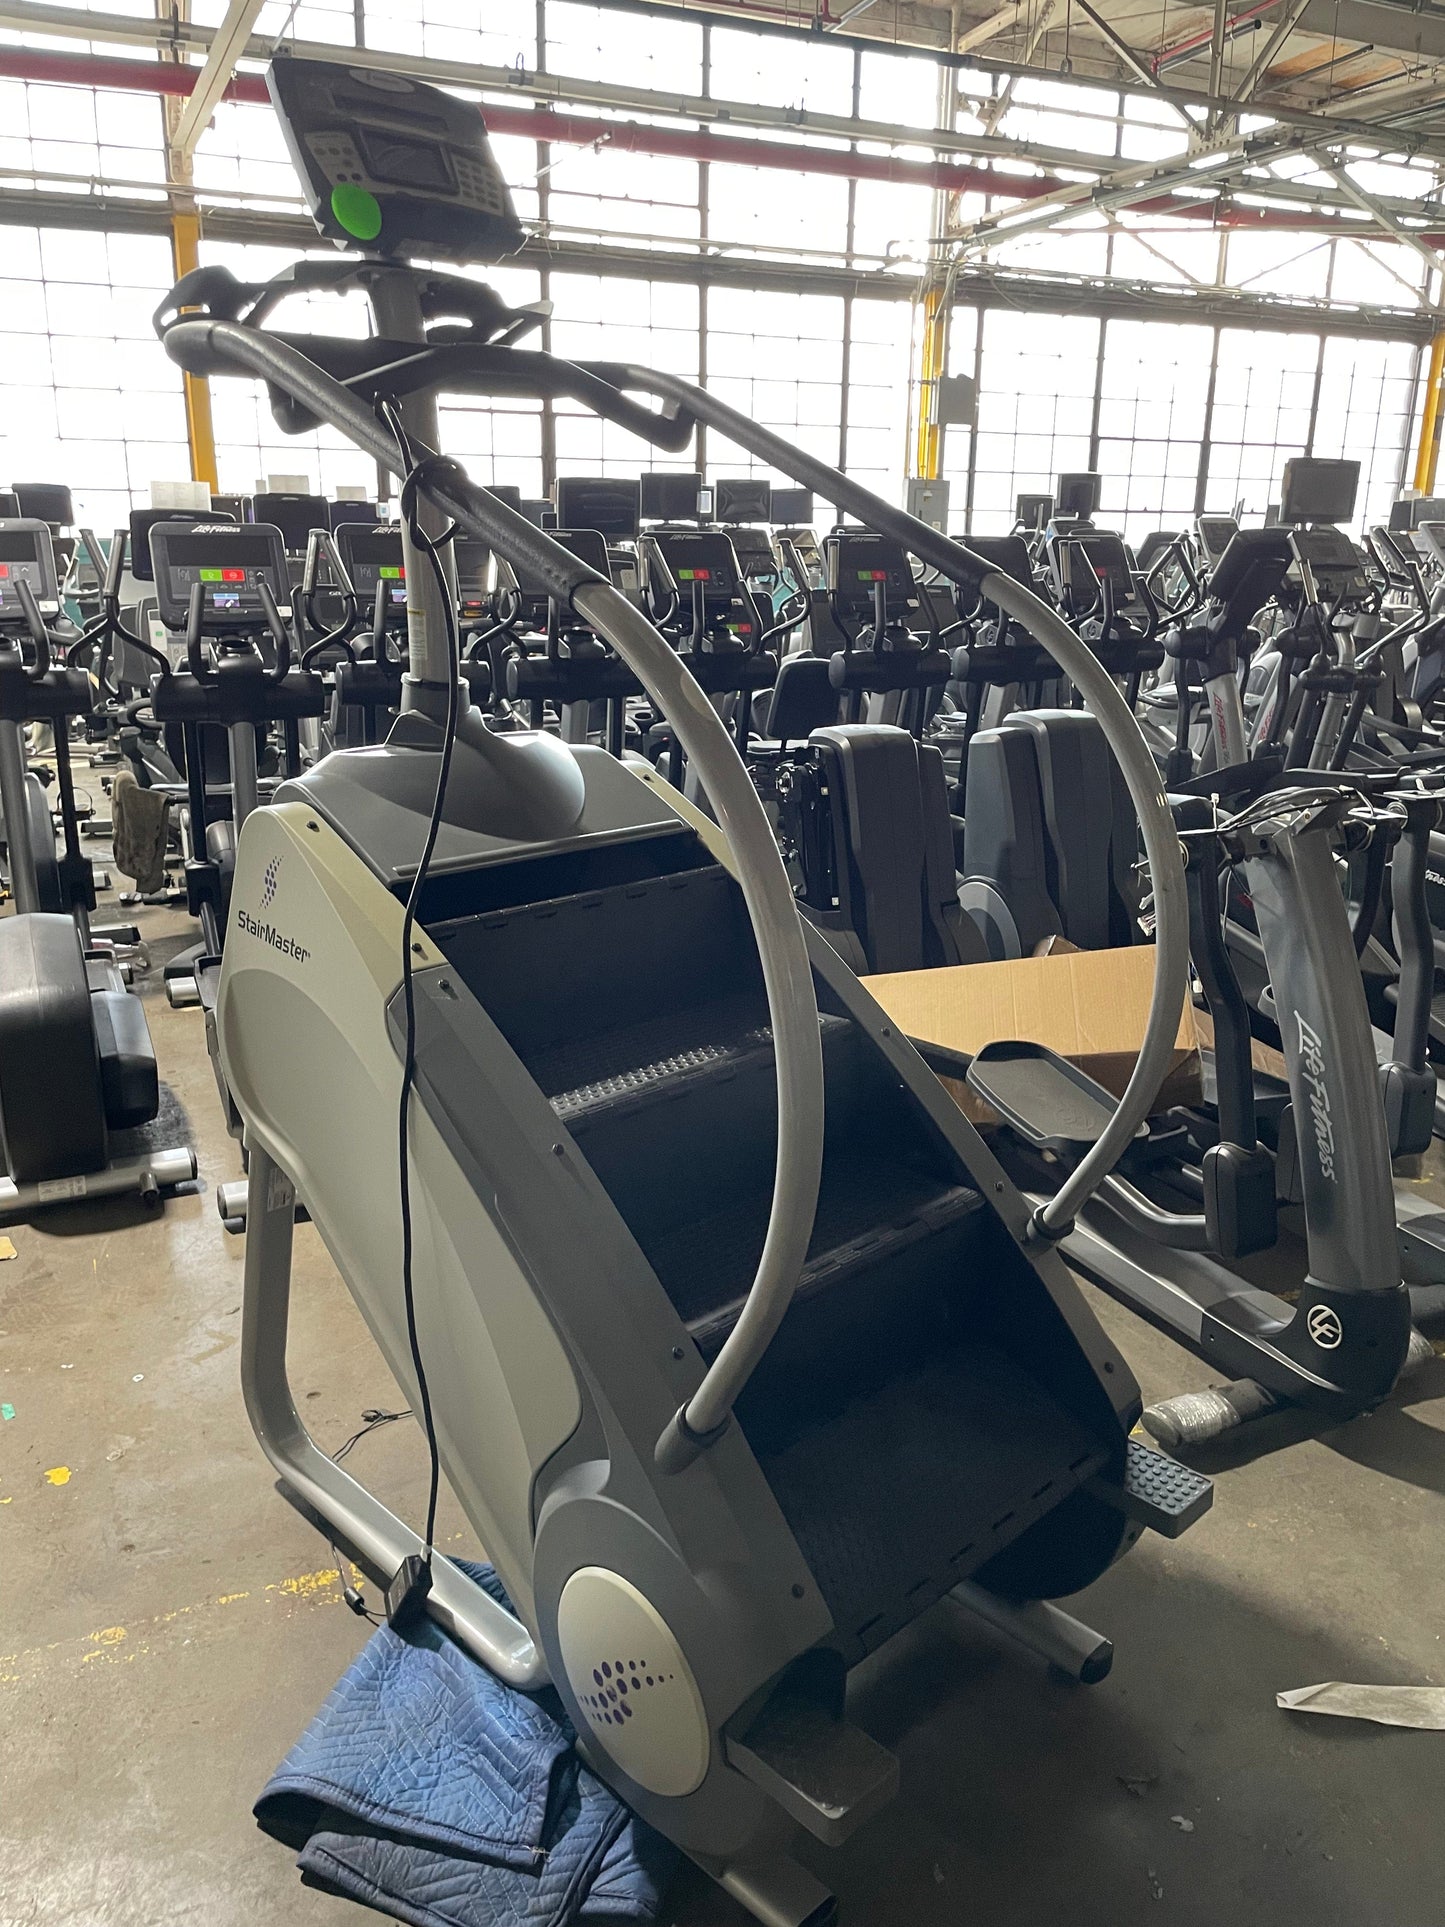 RTC Fitness Equipment 543610 - Sporting Goods > Exercise & Fitness > Cardio > Cardio Machines > Stair Climbers & Steppers > Stair Climbers Stairmaster SM5 Stairmill